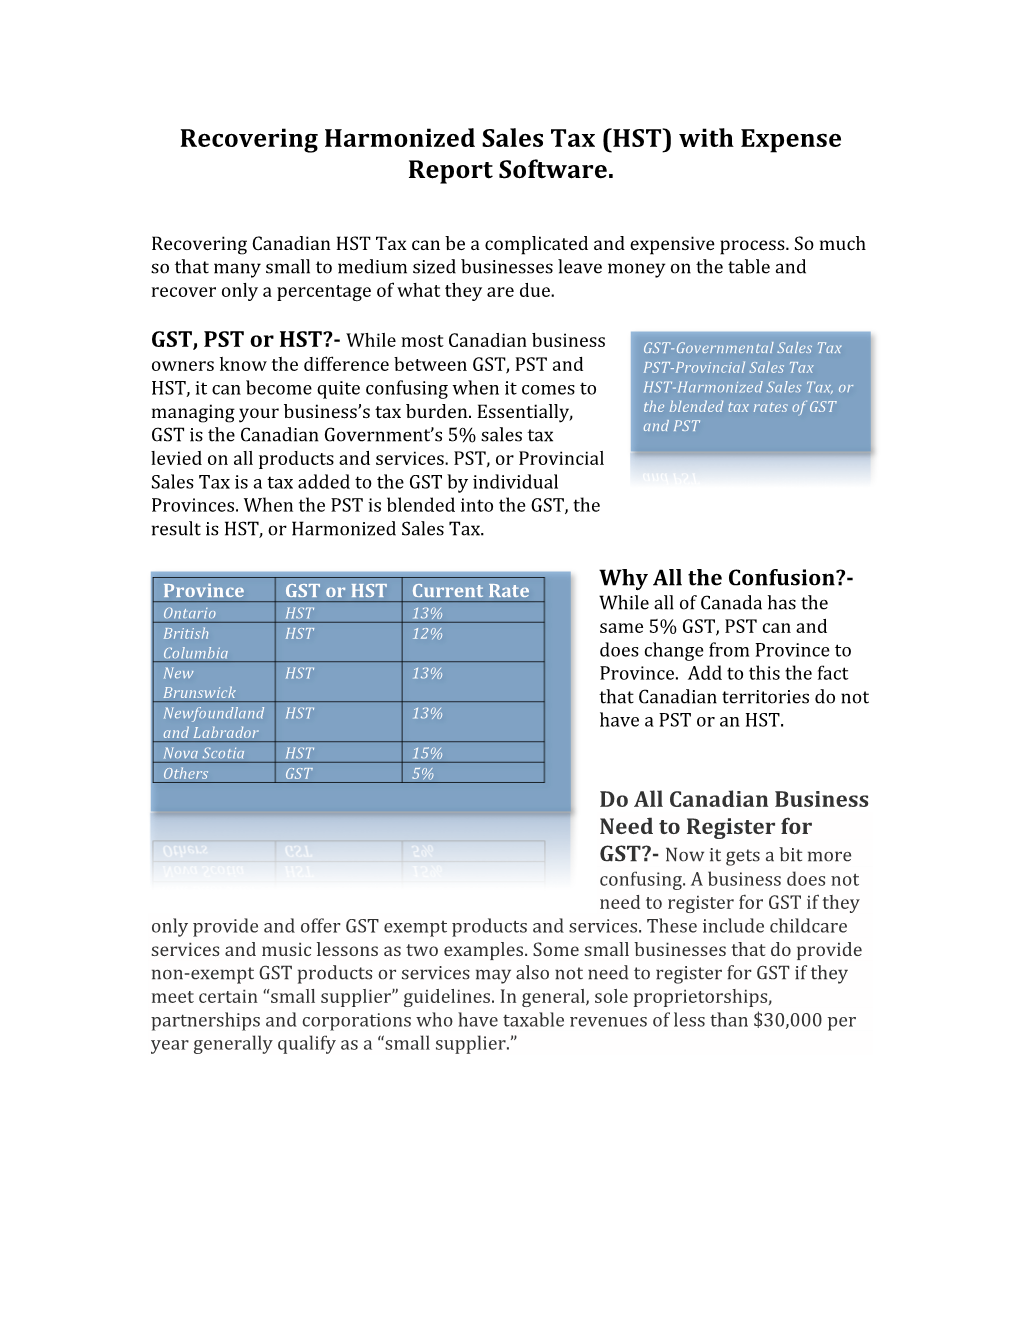 Recovering Harmonized Sales Tax (HST) with Expense Report Software